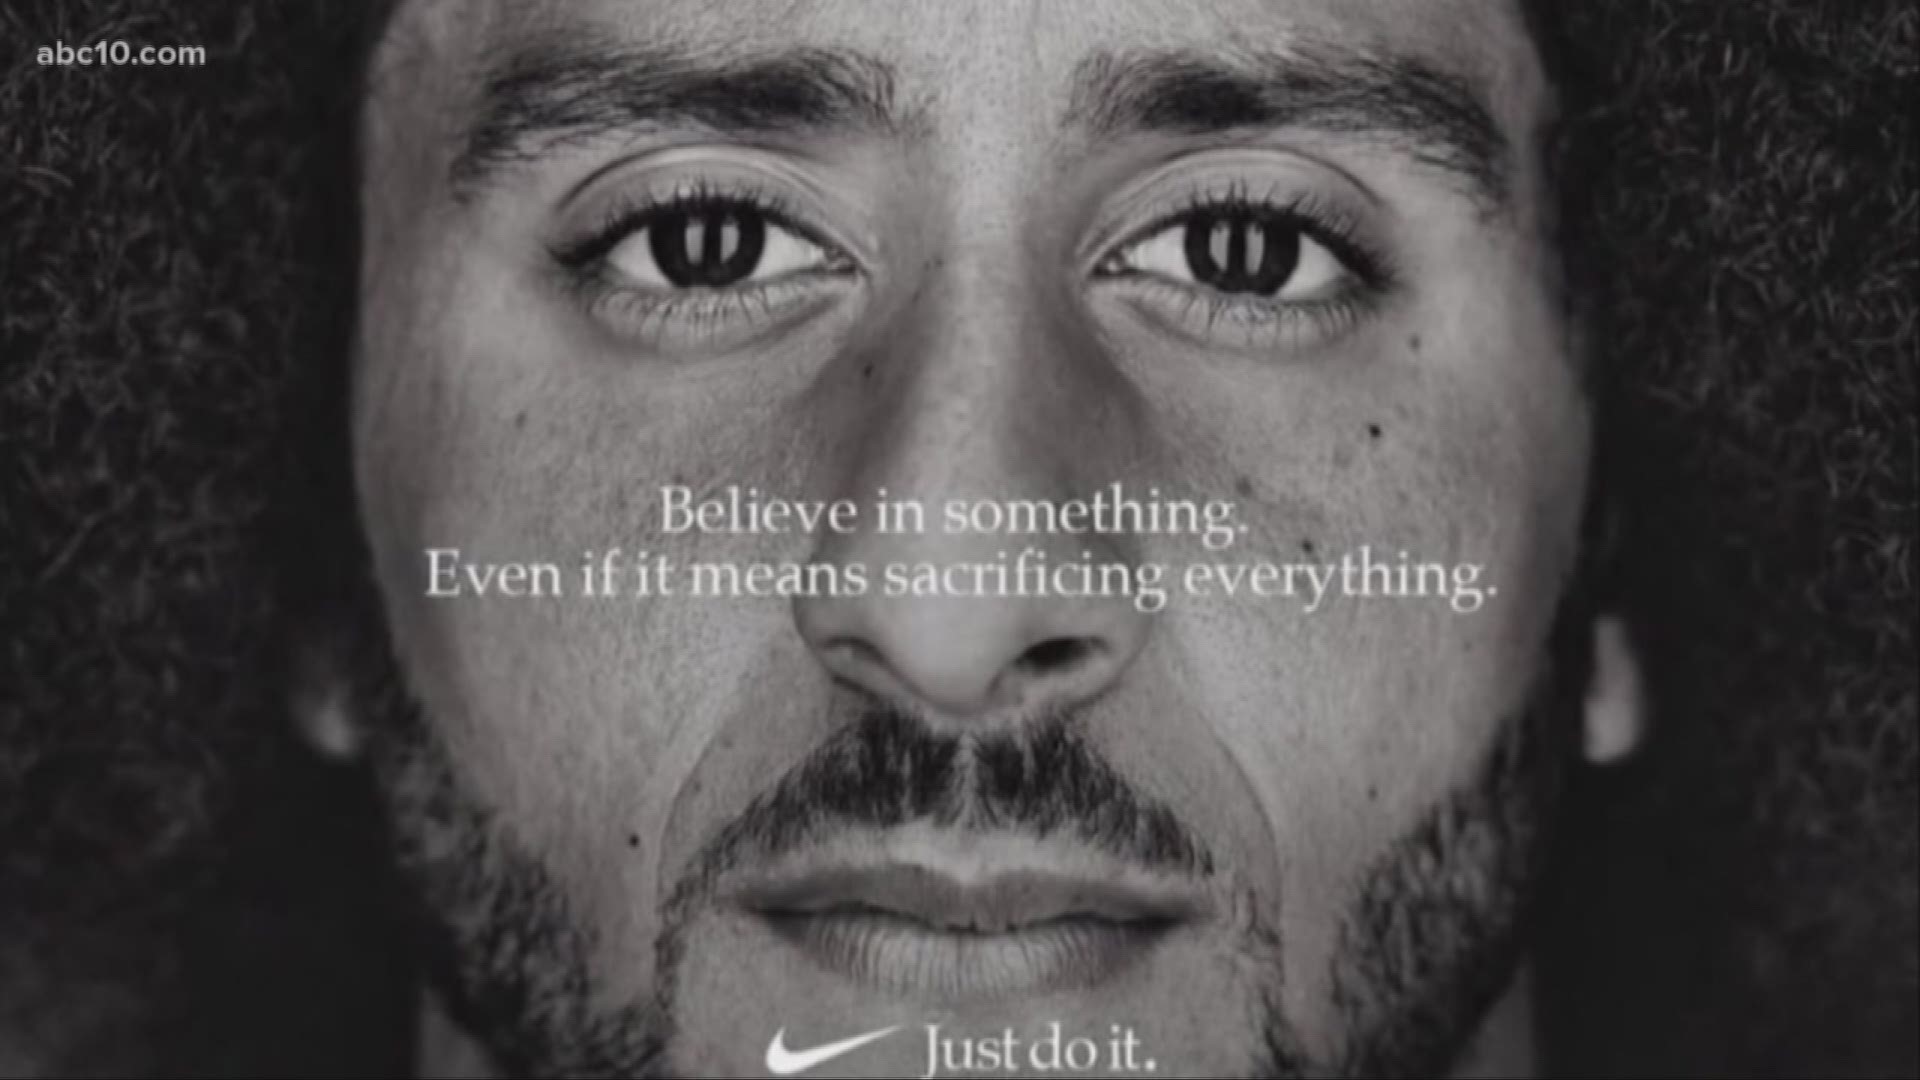 Nike released a new ad featuring former San Francisco 49ers quarterback Colin Kaepernick and it has people across the country talking, including veterans in his Northern California hometown of Turlock.